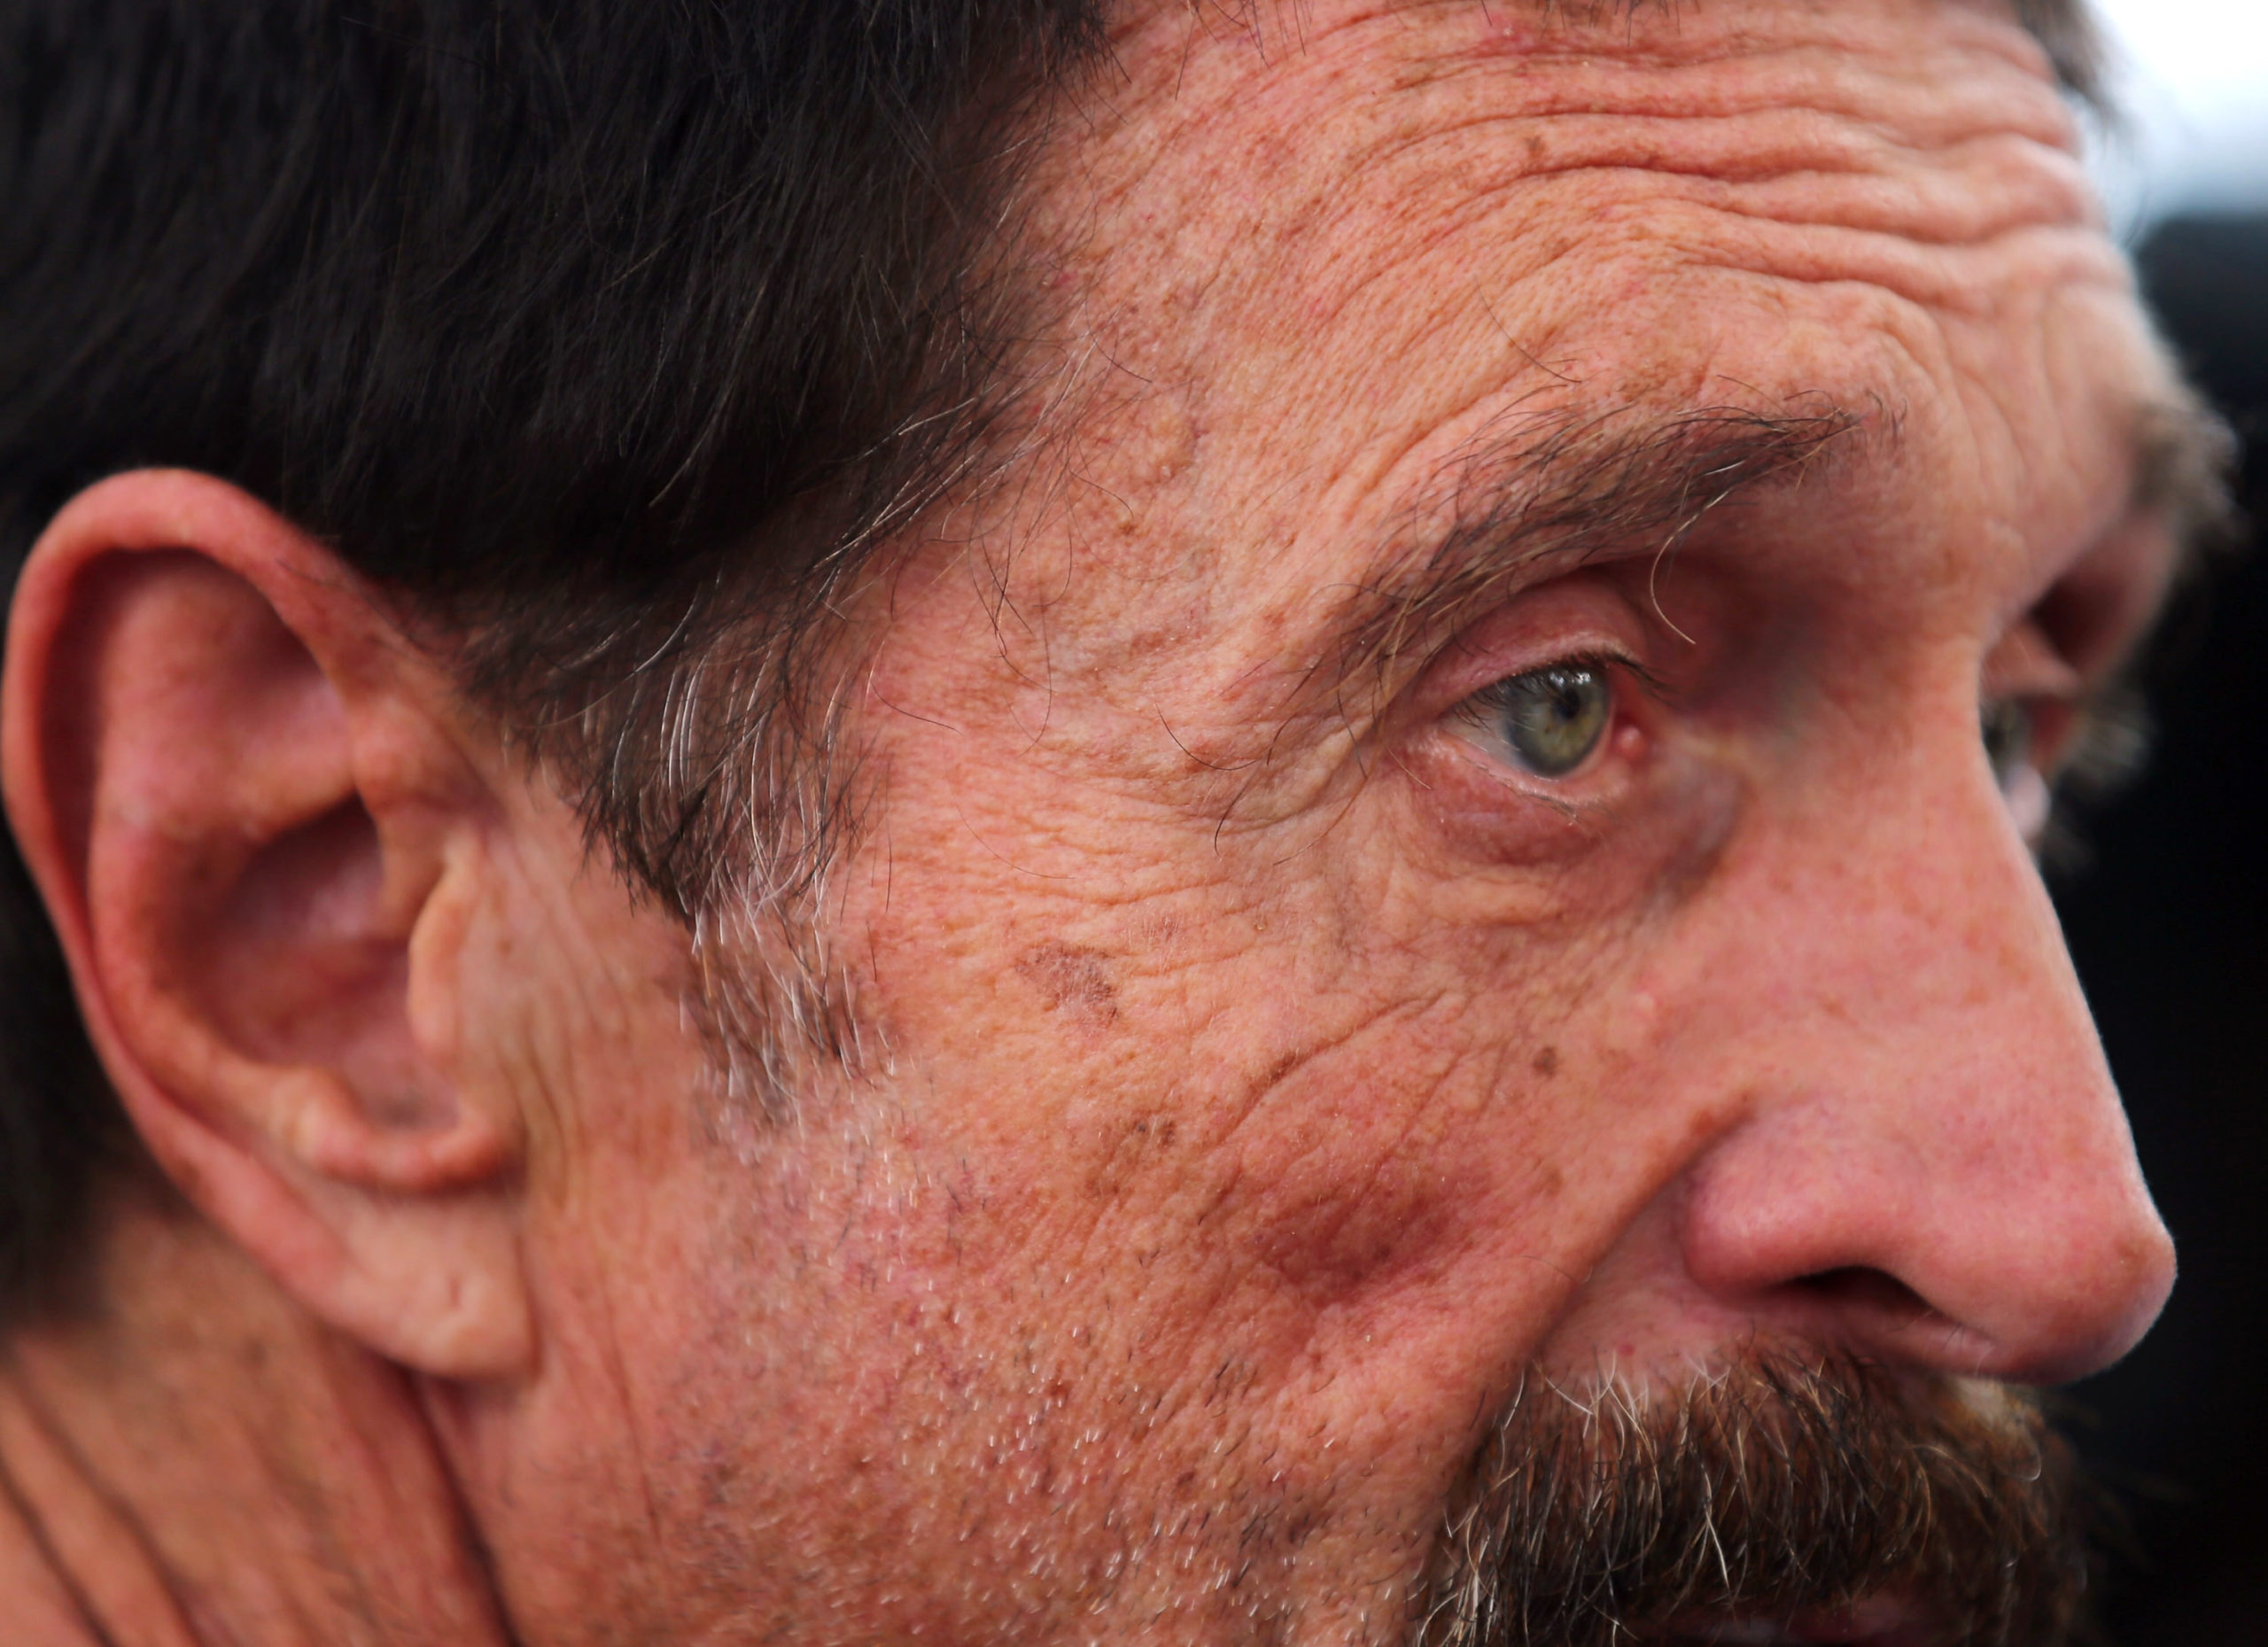 John McAfee Netflix movie questions whether or not he’s really dead